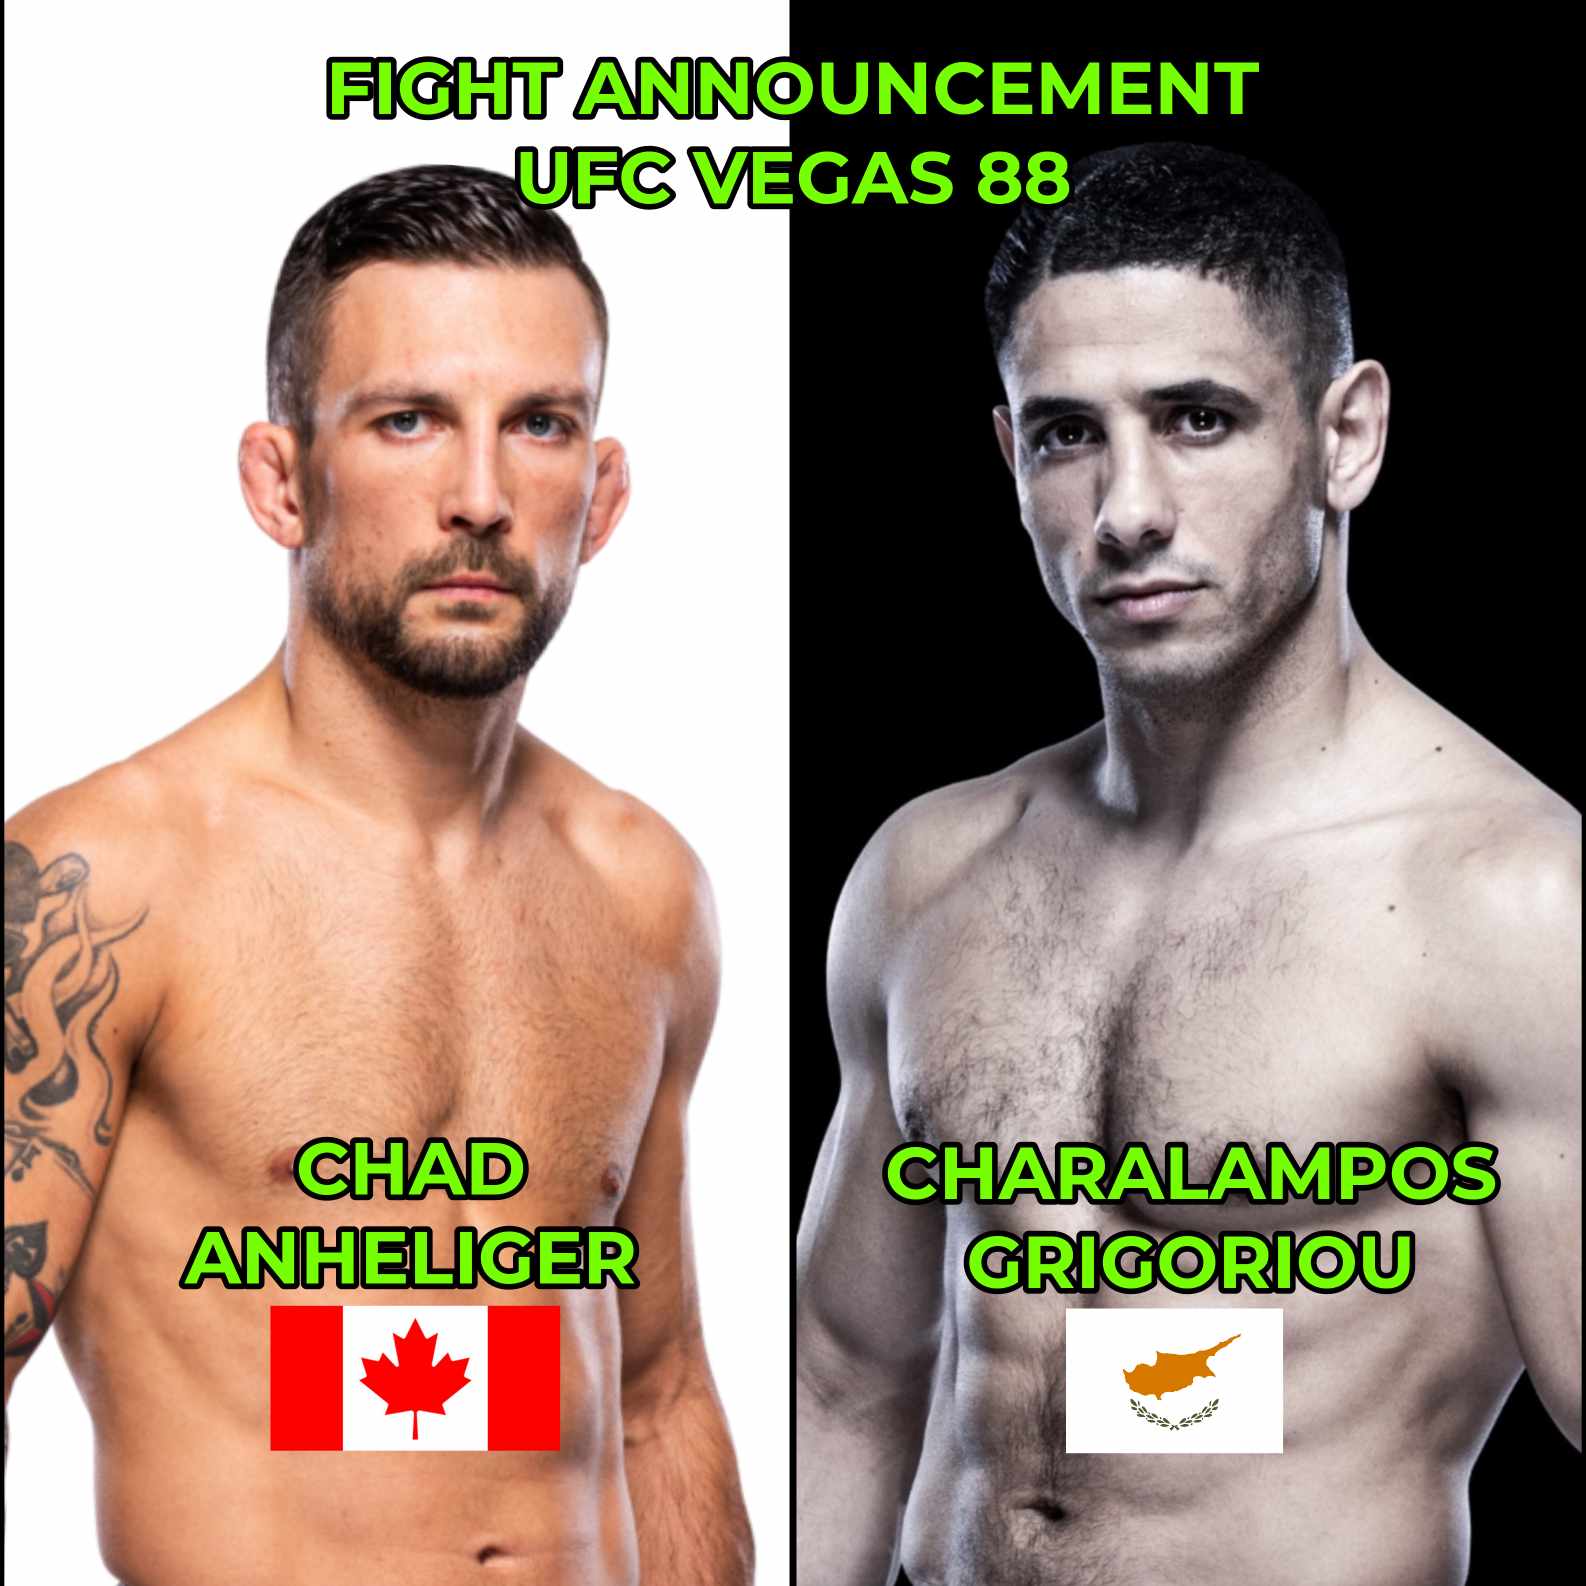 Calgary’s Chad Anheliger To Fight Charalampos Grigoriou At UFC Vegas 88